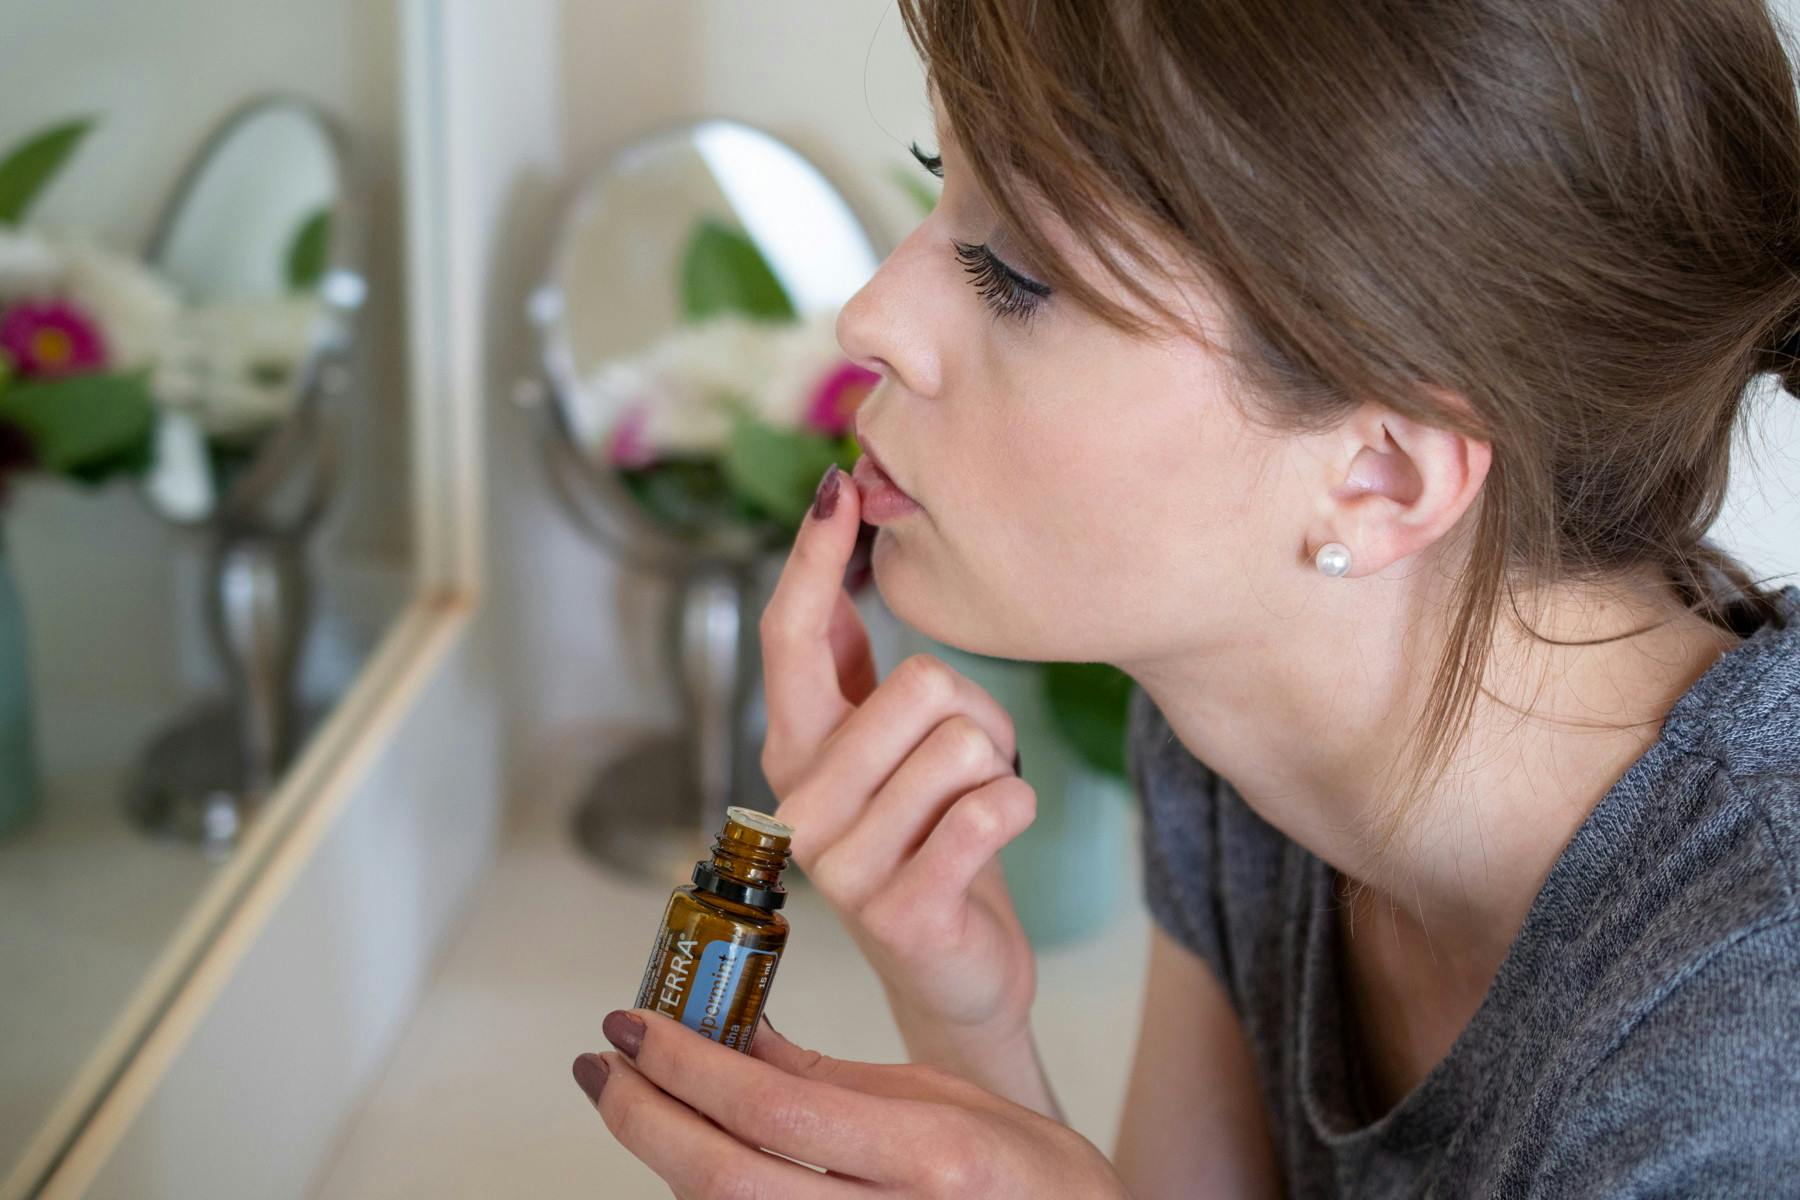 Add a drop of peppermint oil to your lip gloss to plump your lips.